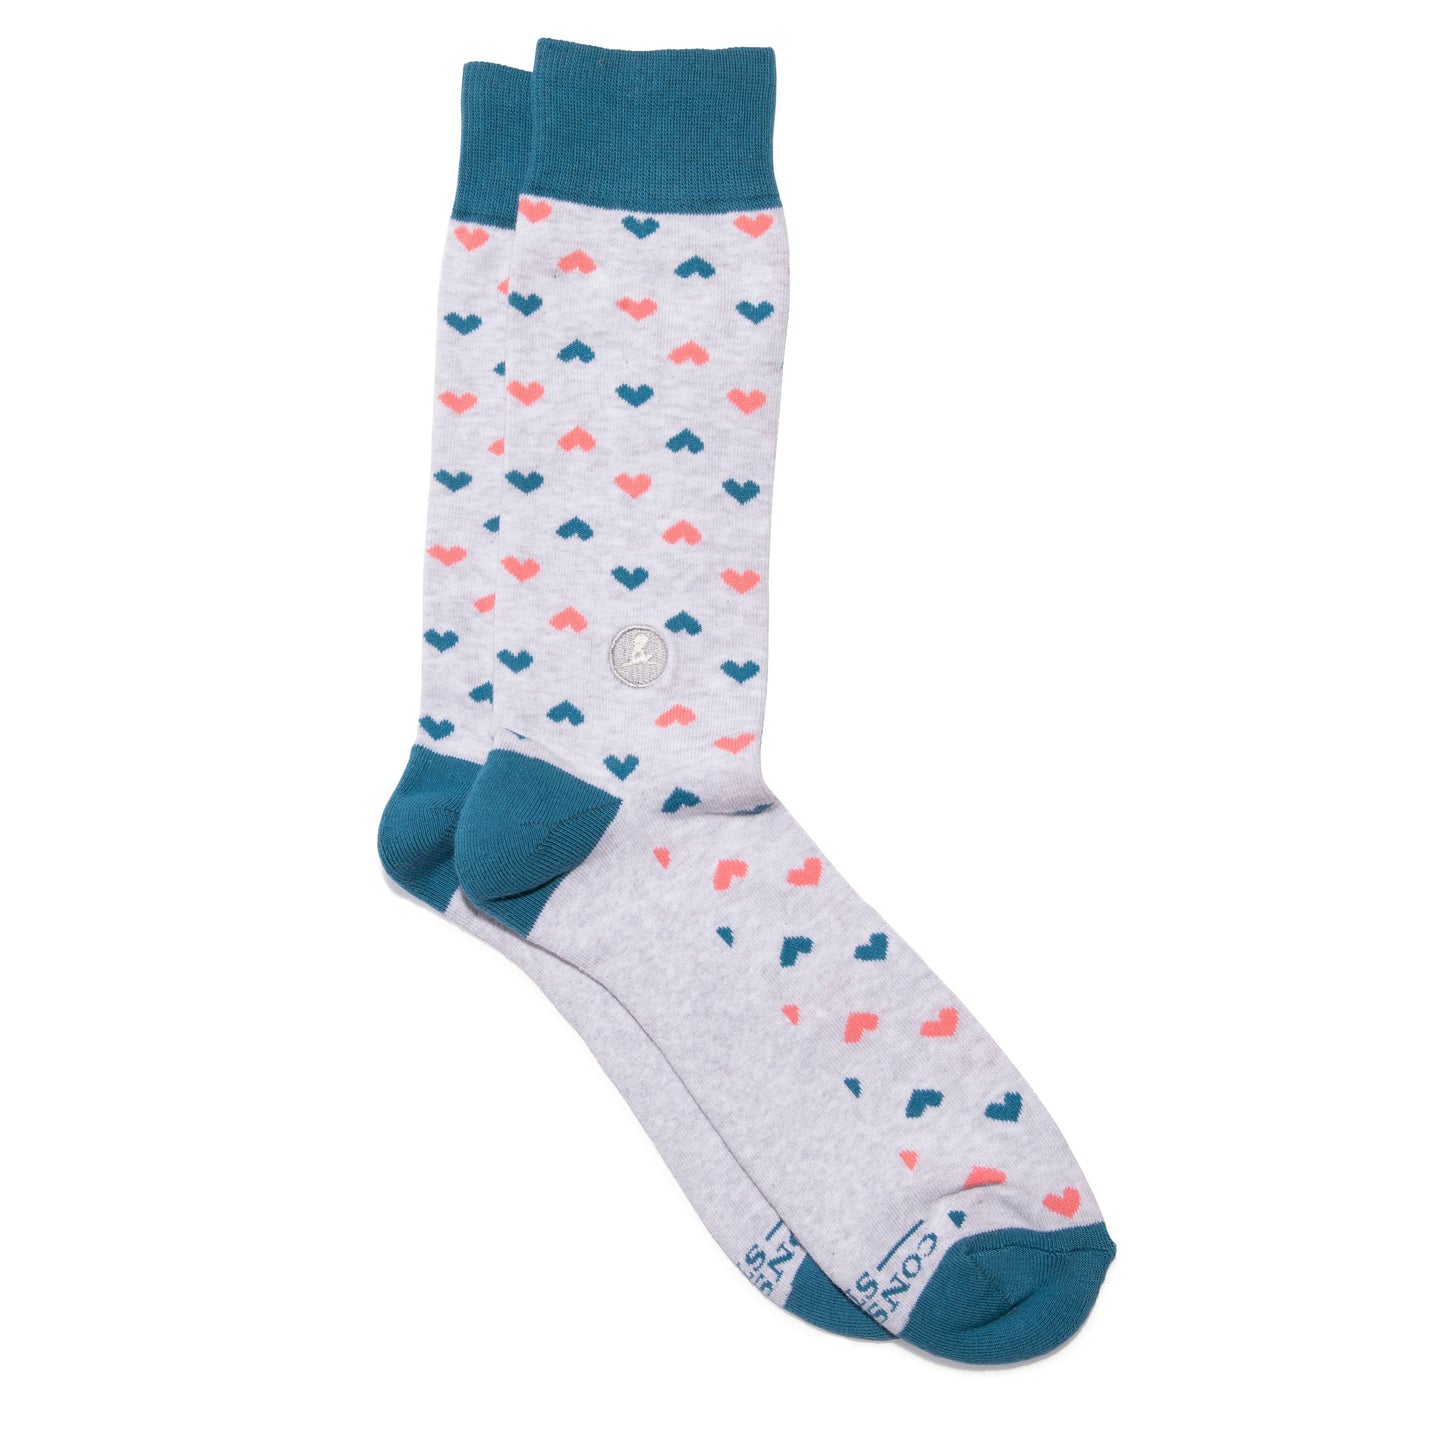 Socks That Find a Cure (Medium) Accessories Conscious Step   